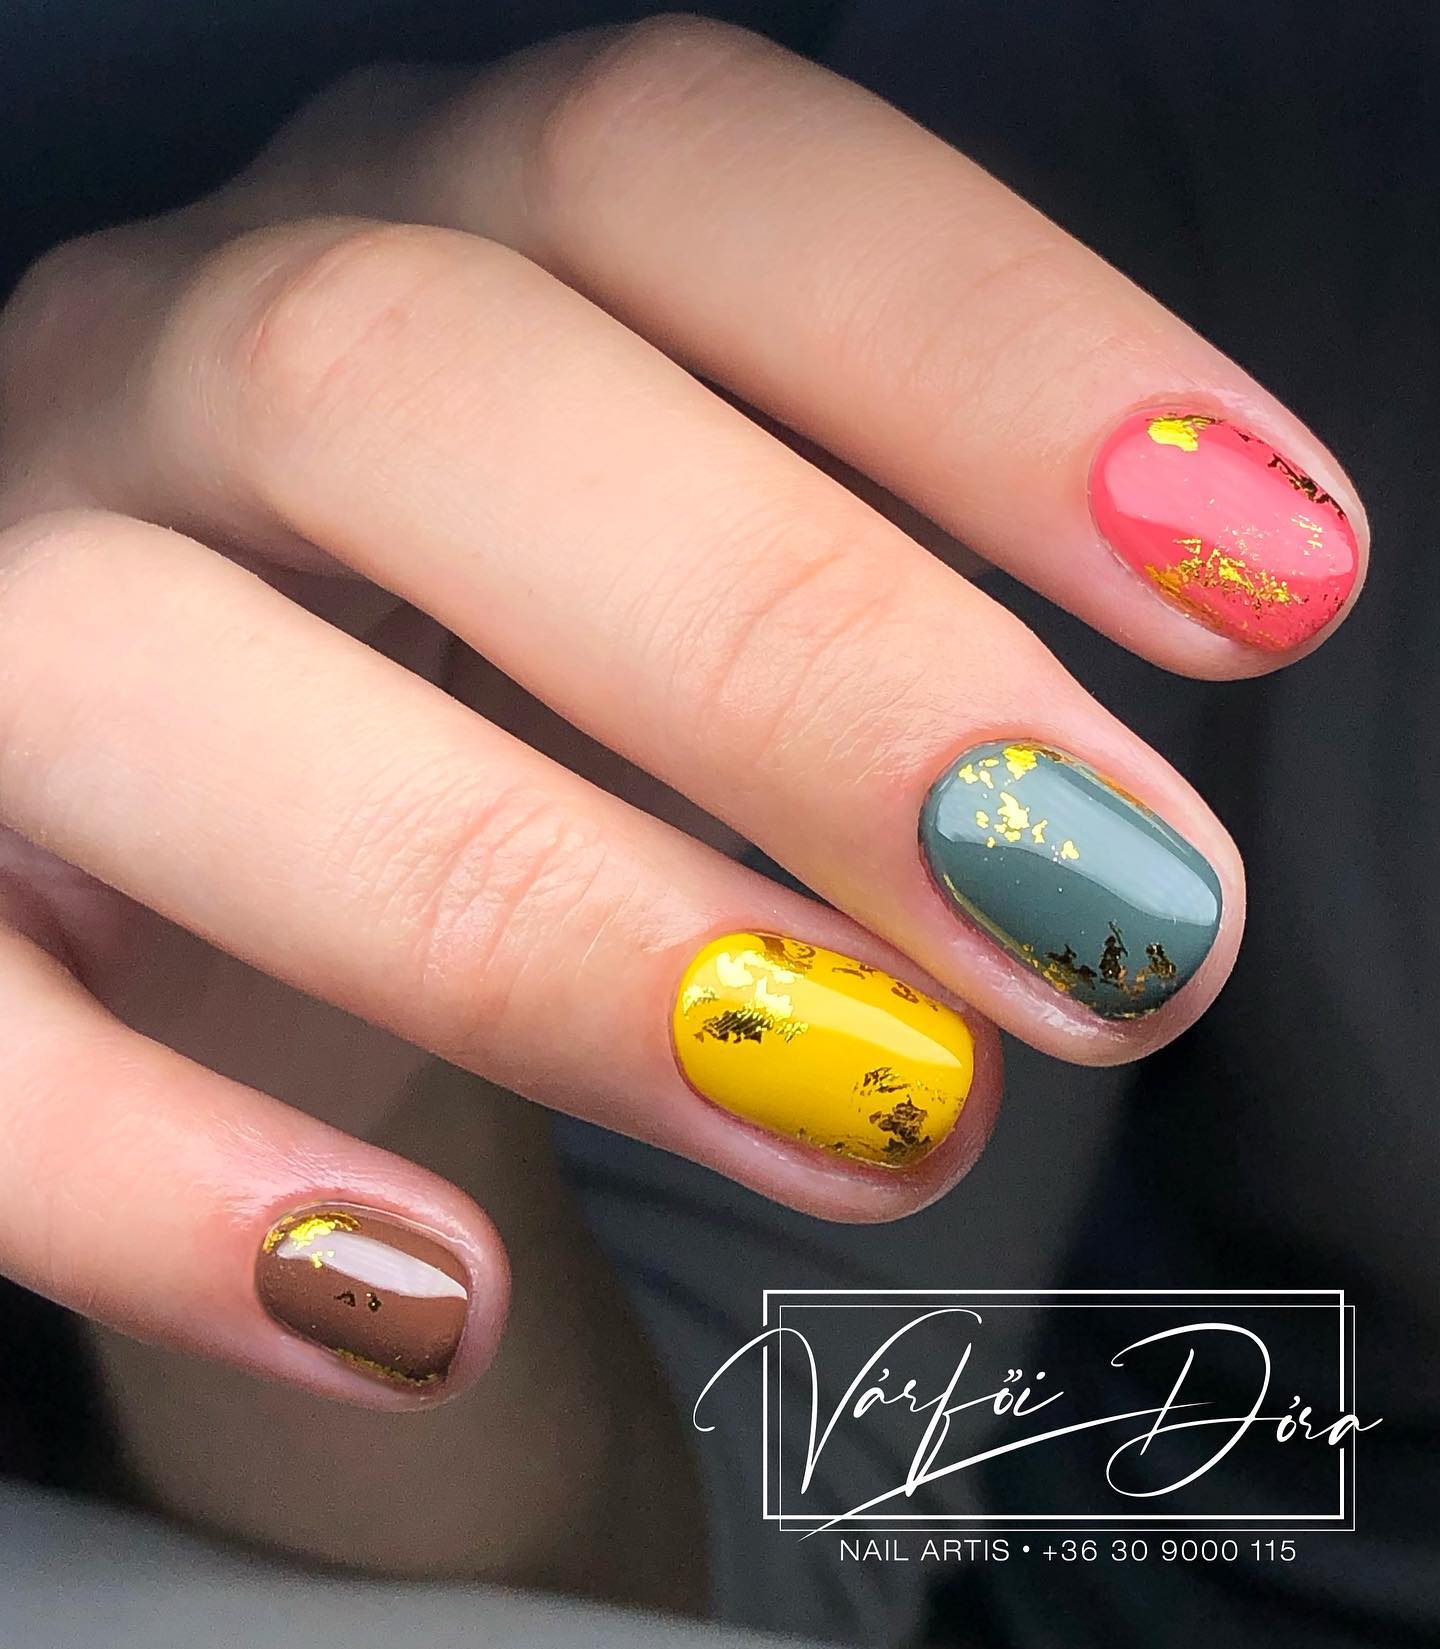 Are you ready to shine with colorful nail polishes on your short manicure? The colors of brown, dark yellow, pastel blue and pink are especially great for fall. Plus, golden glitters take these nails to a different level.